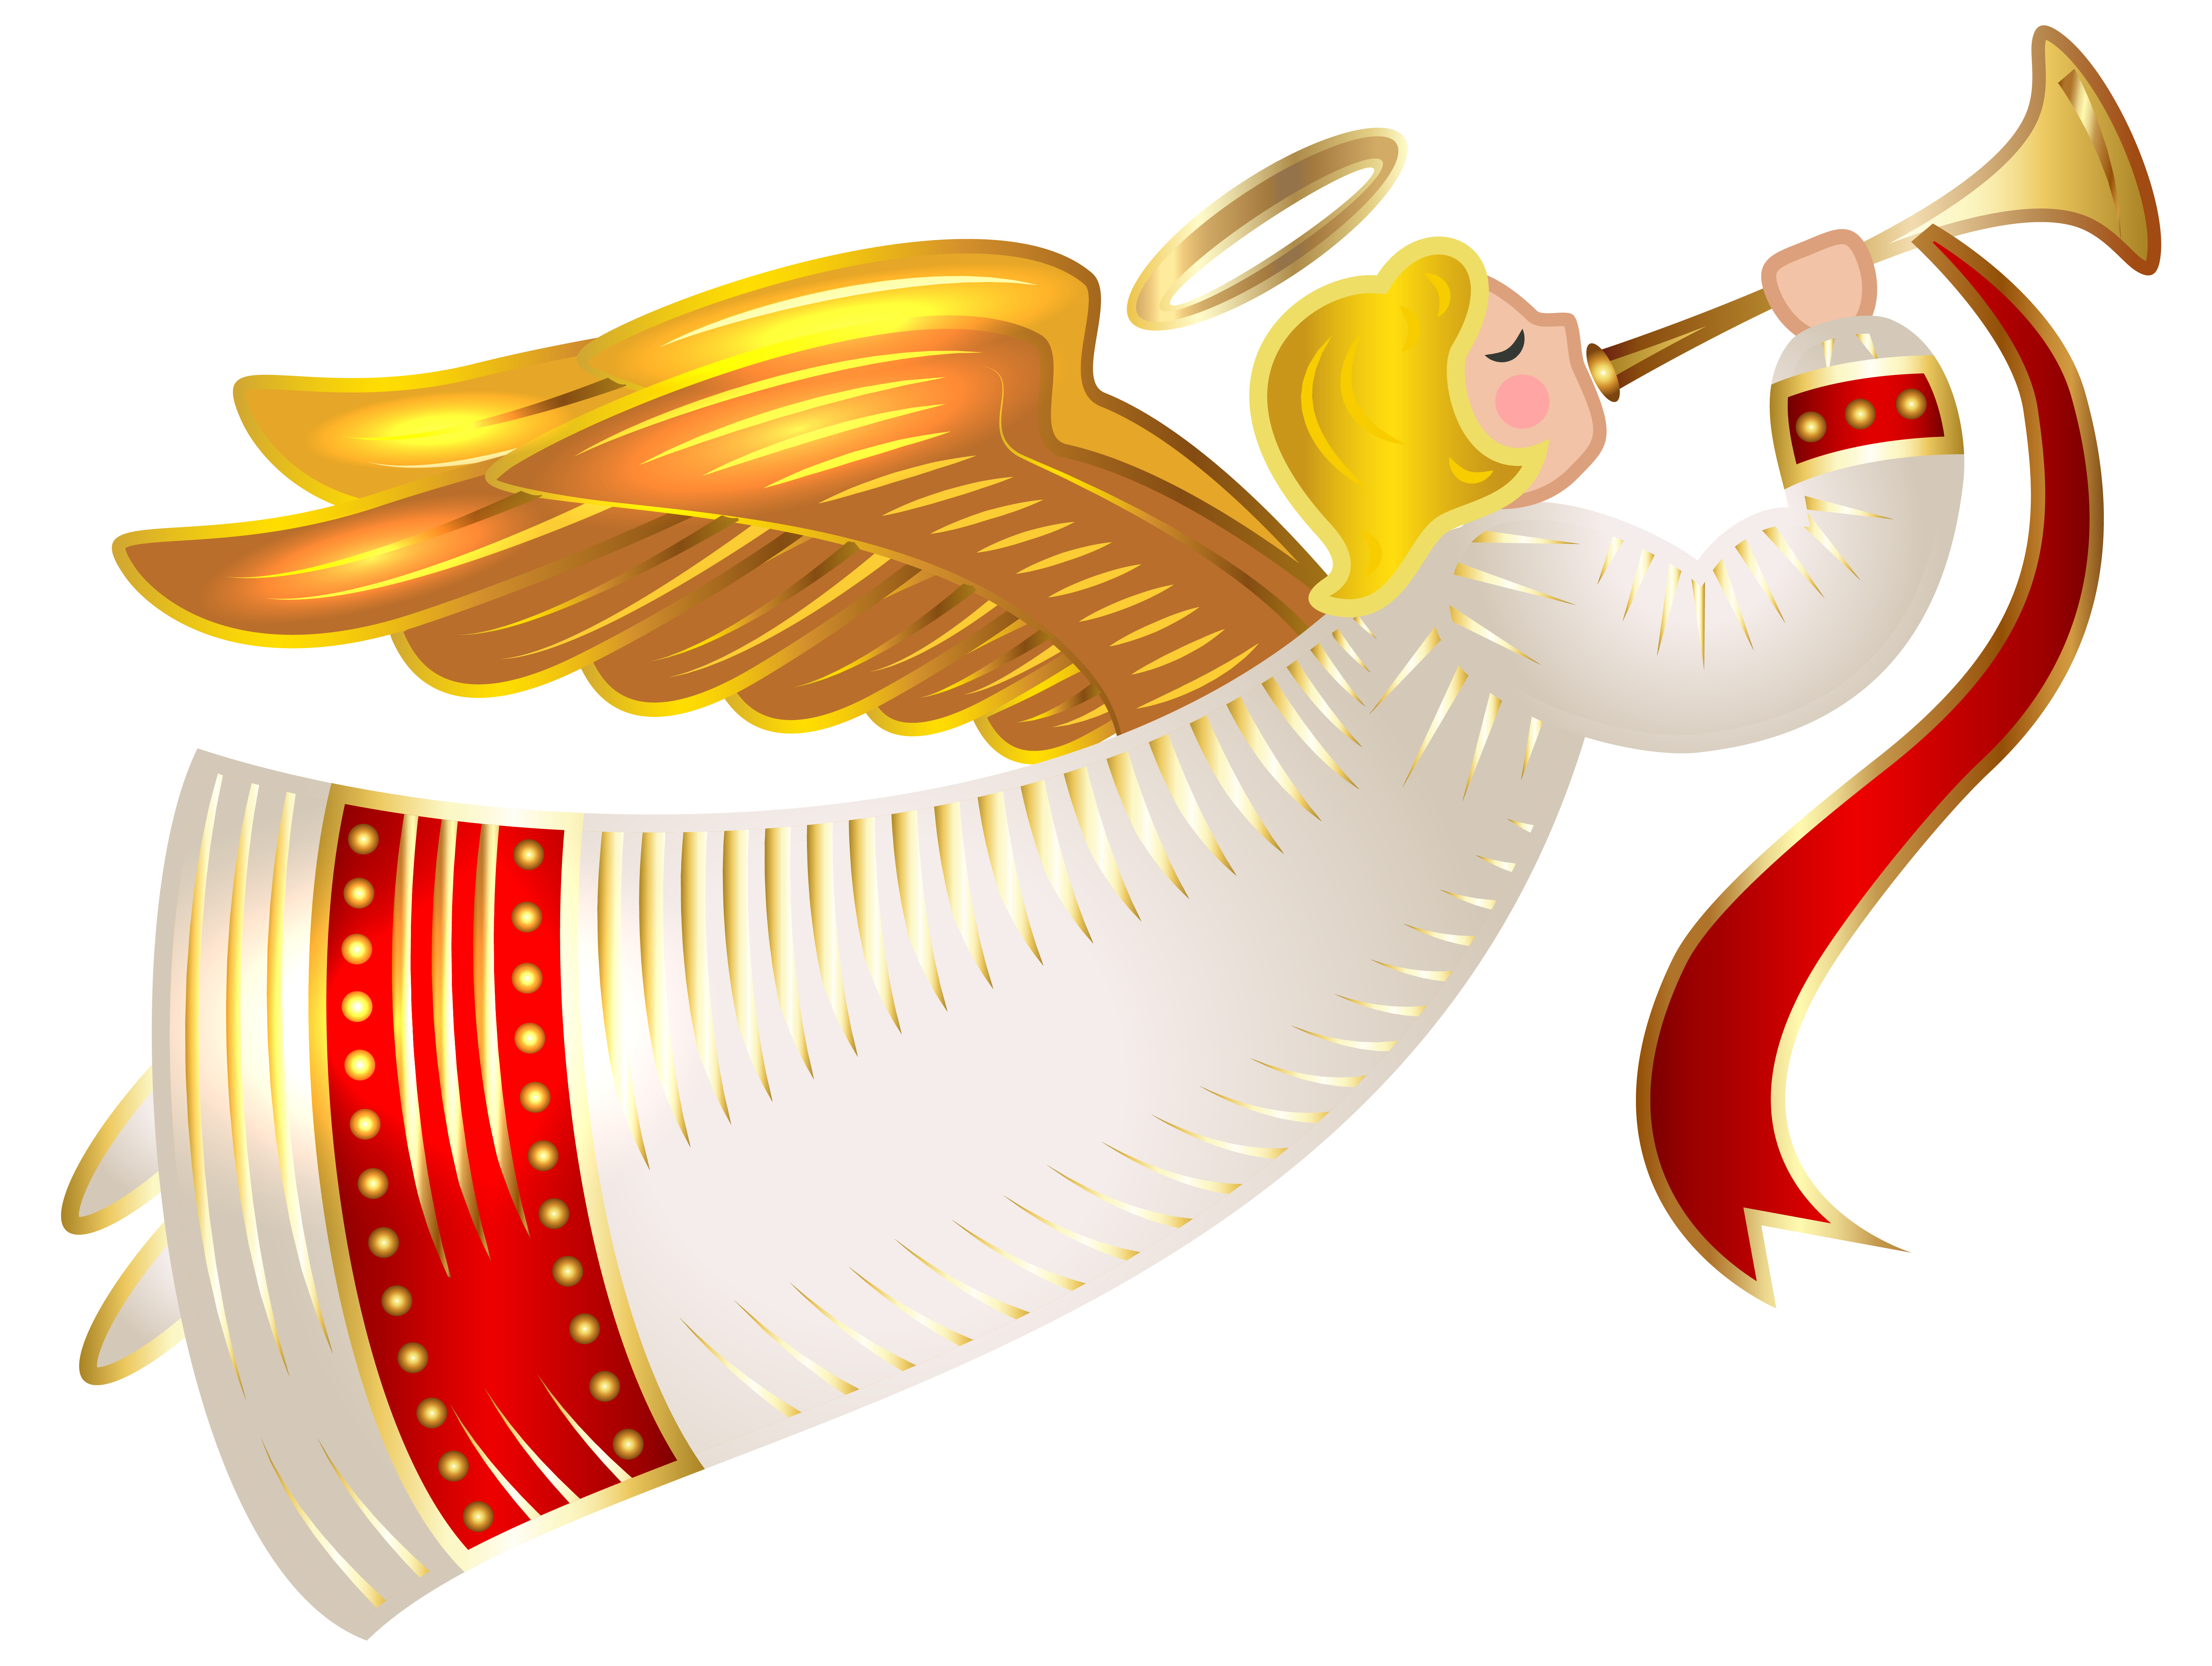 Angel Christmas Clipart Free Download - Search images from huge ...